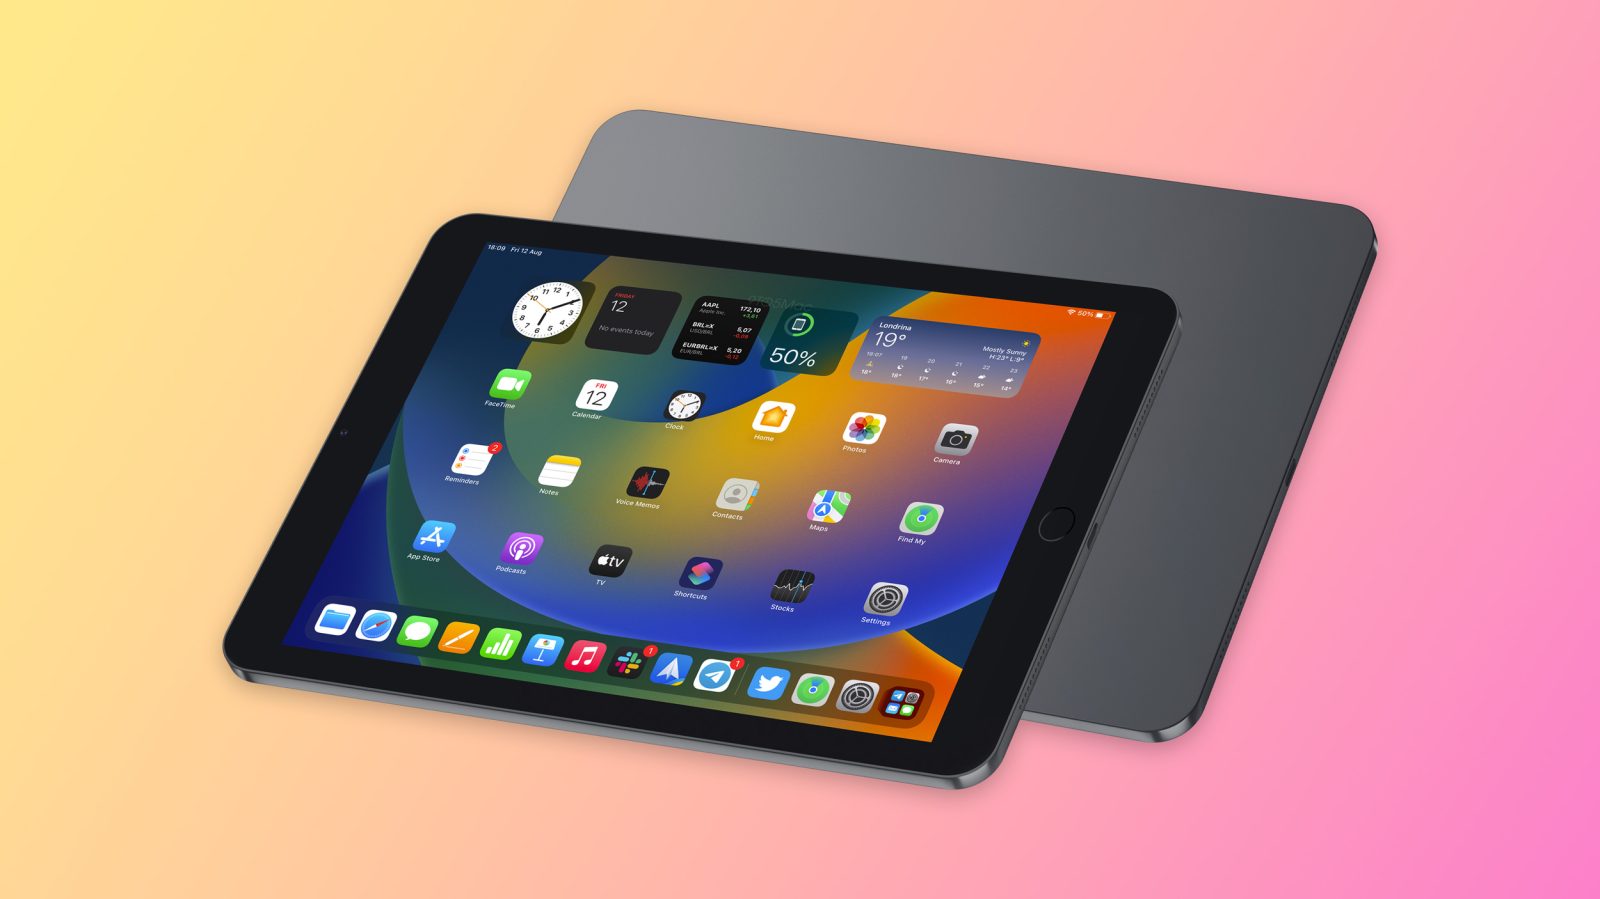 10th generation iPad: Here's everything we know so far